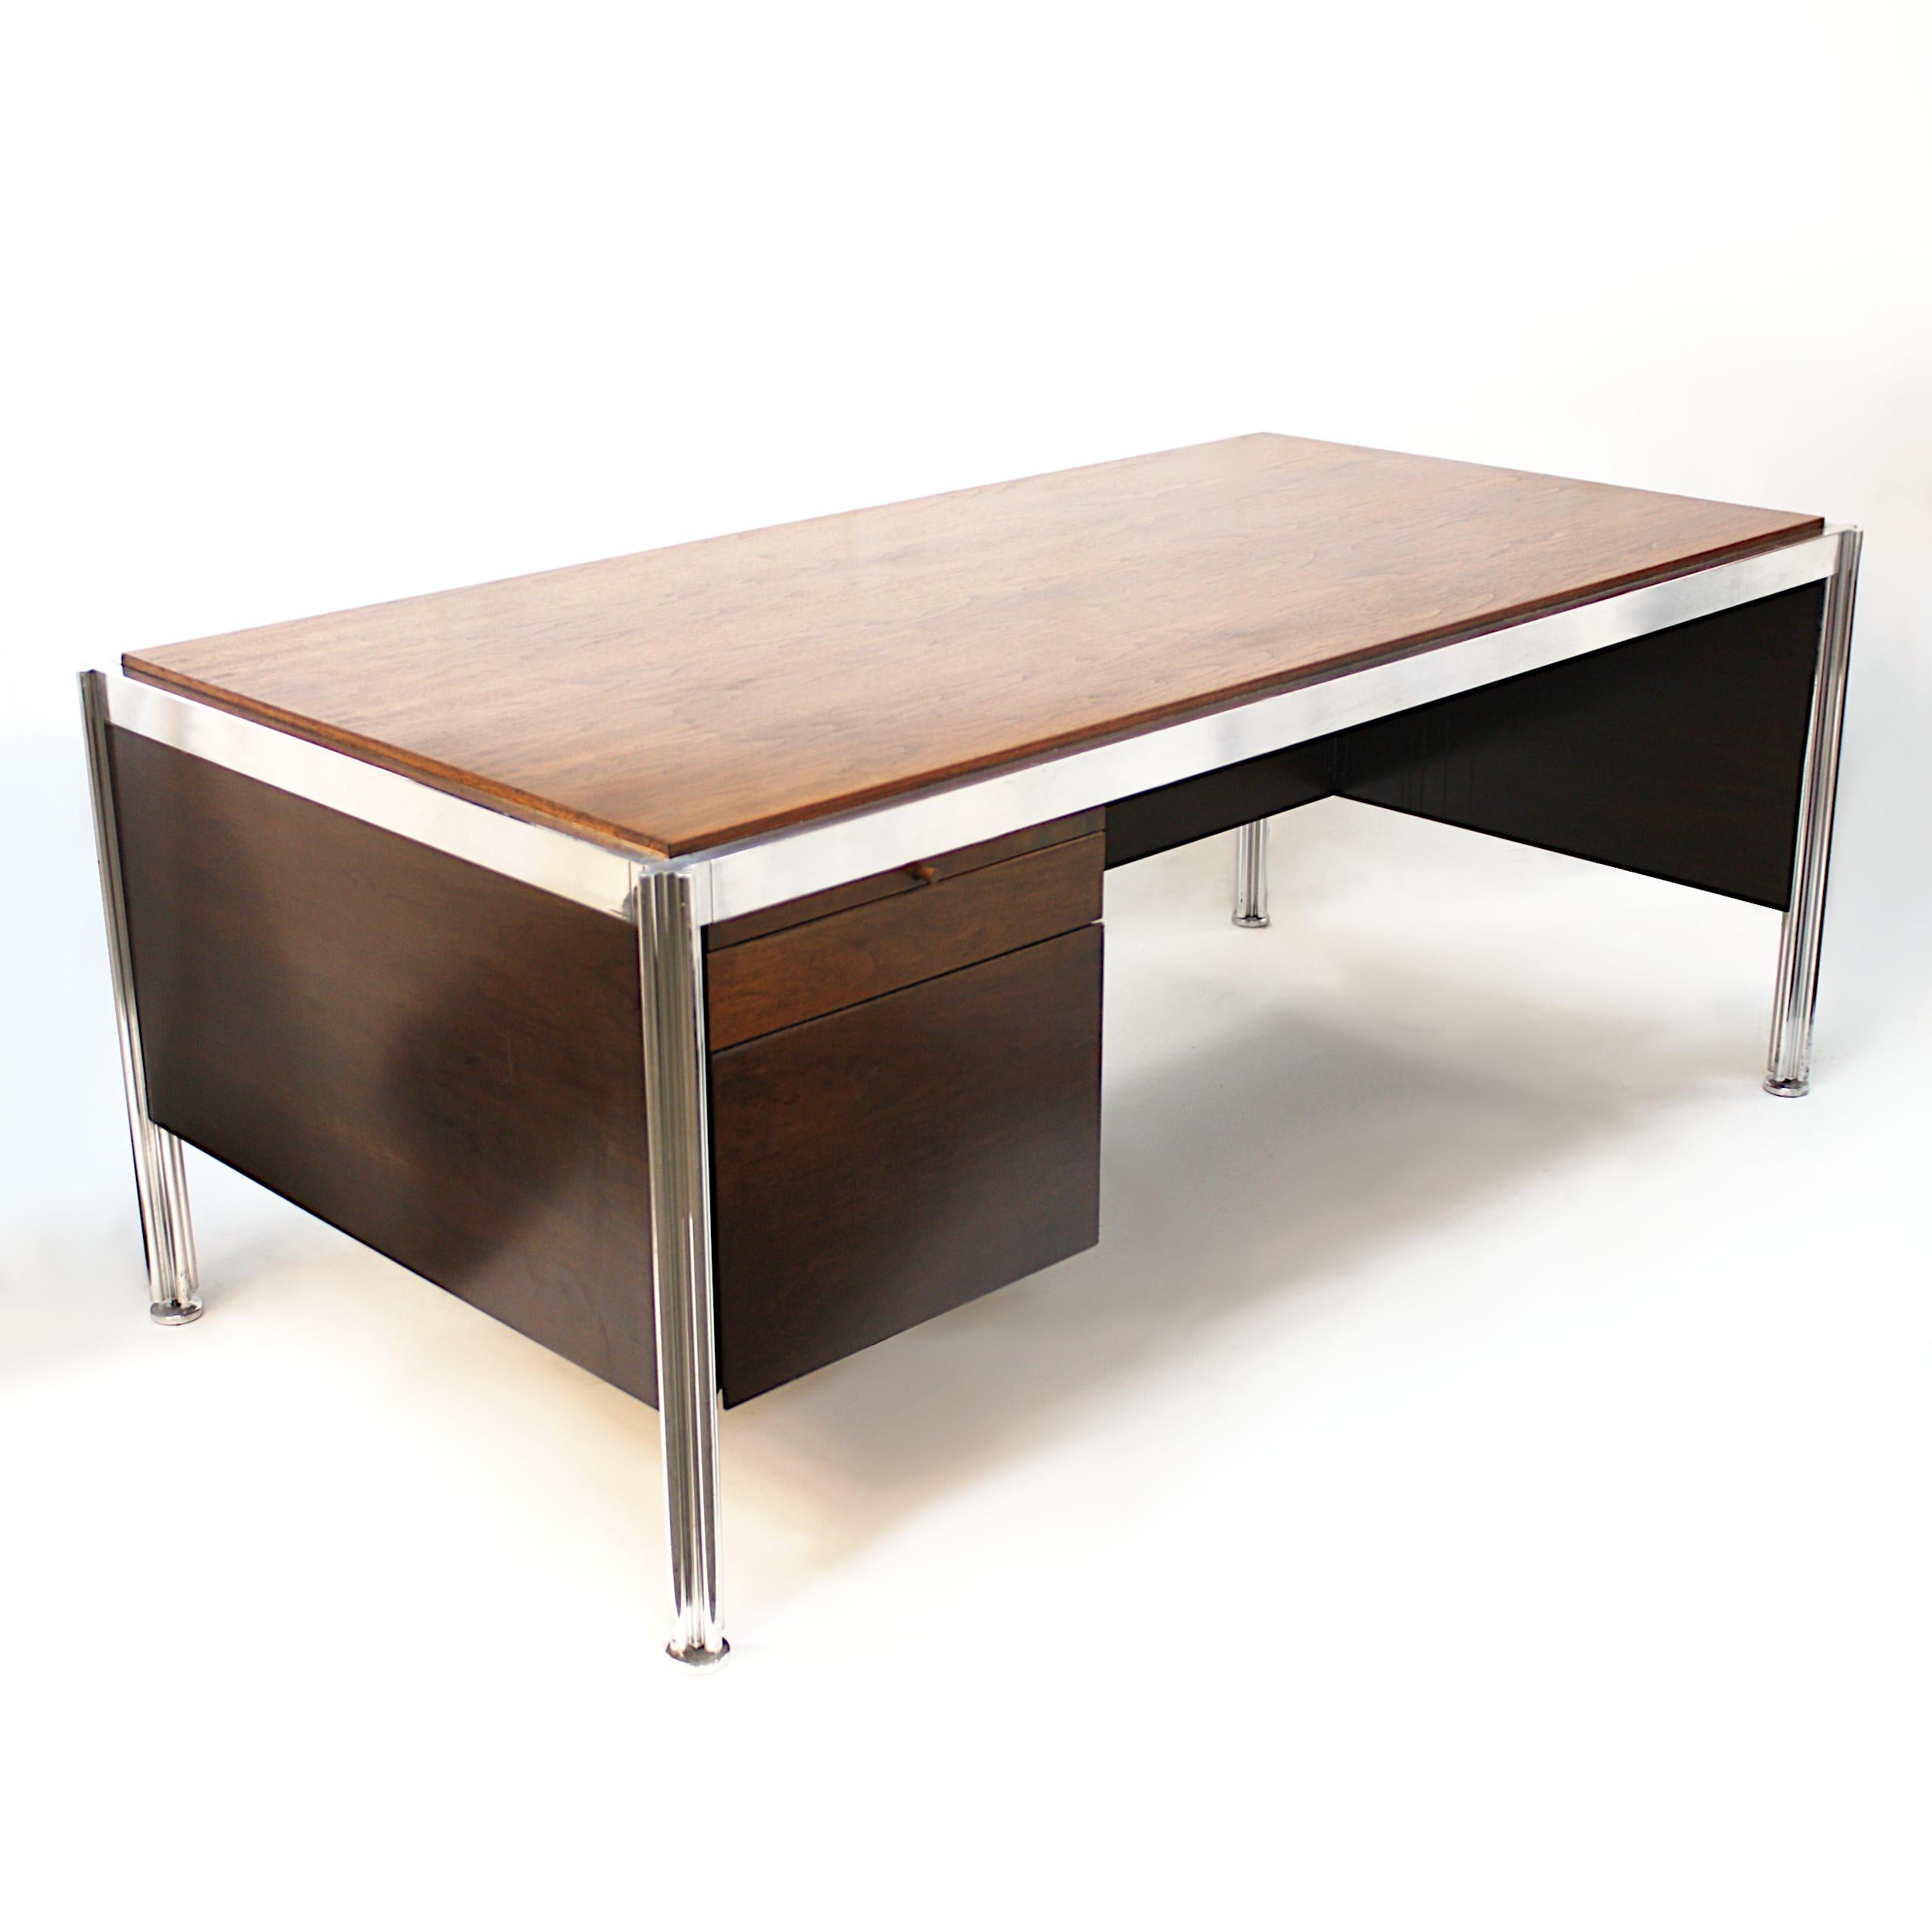 Amazing 1970s walnut and aluminum executive desk designed by George Ciancimino for Jens Risom Furniture. Desk features a sleek, Minimalist design, two drawers, two slide-out tablets, and unique, puzzle-shaped aluminum legs. Would make an impressive